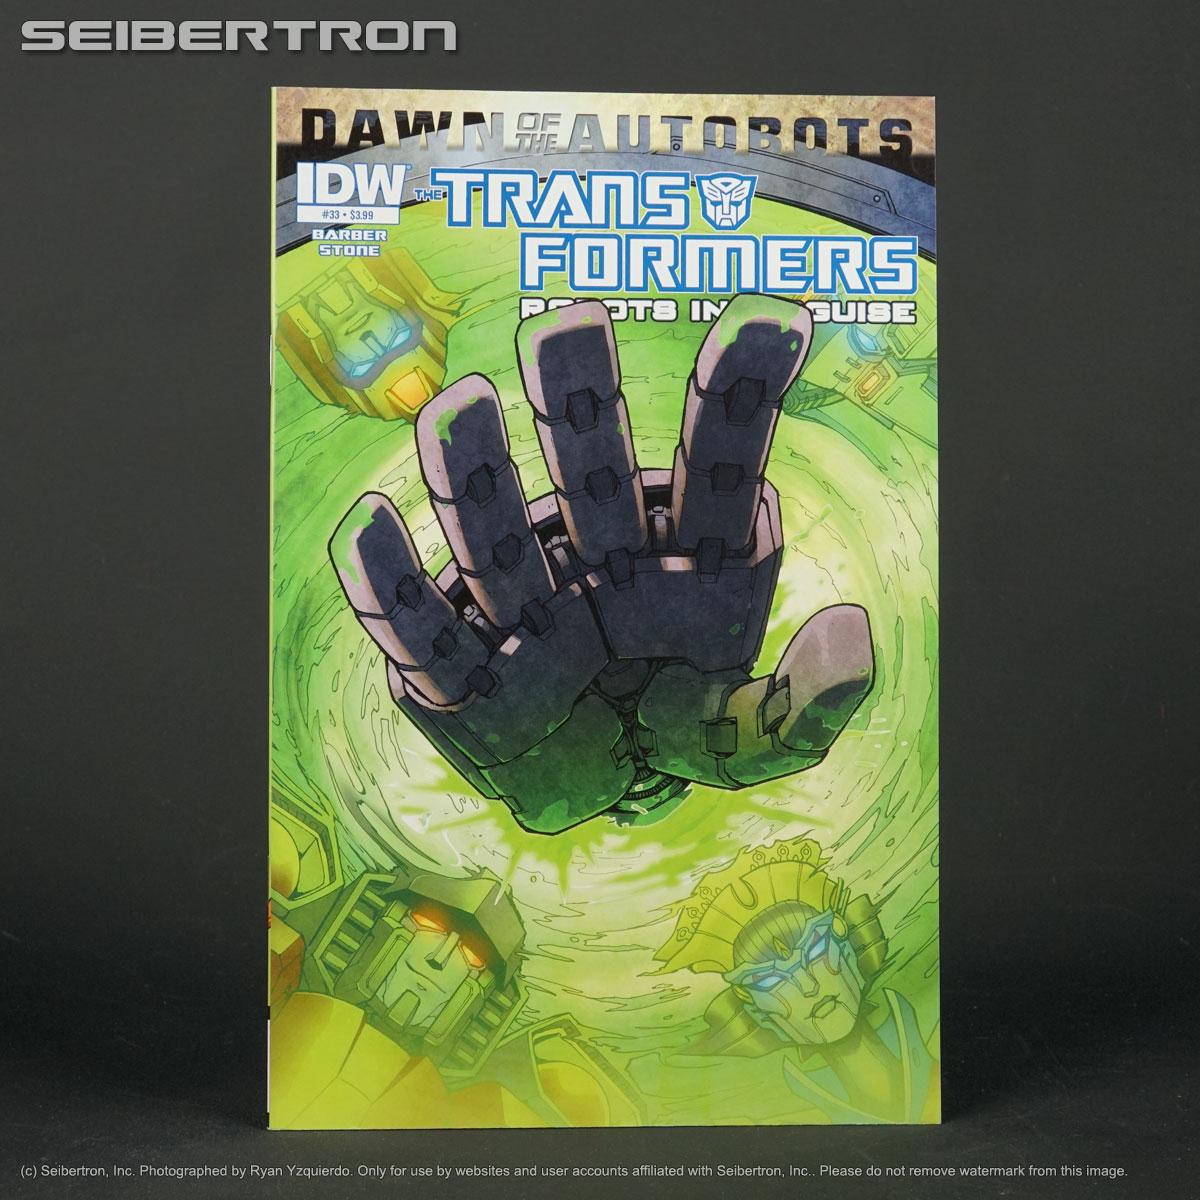 Transformers ROBOTS IN DISGUISE #33 IDW Comics 2014 Dawn of Autobots 200211b